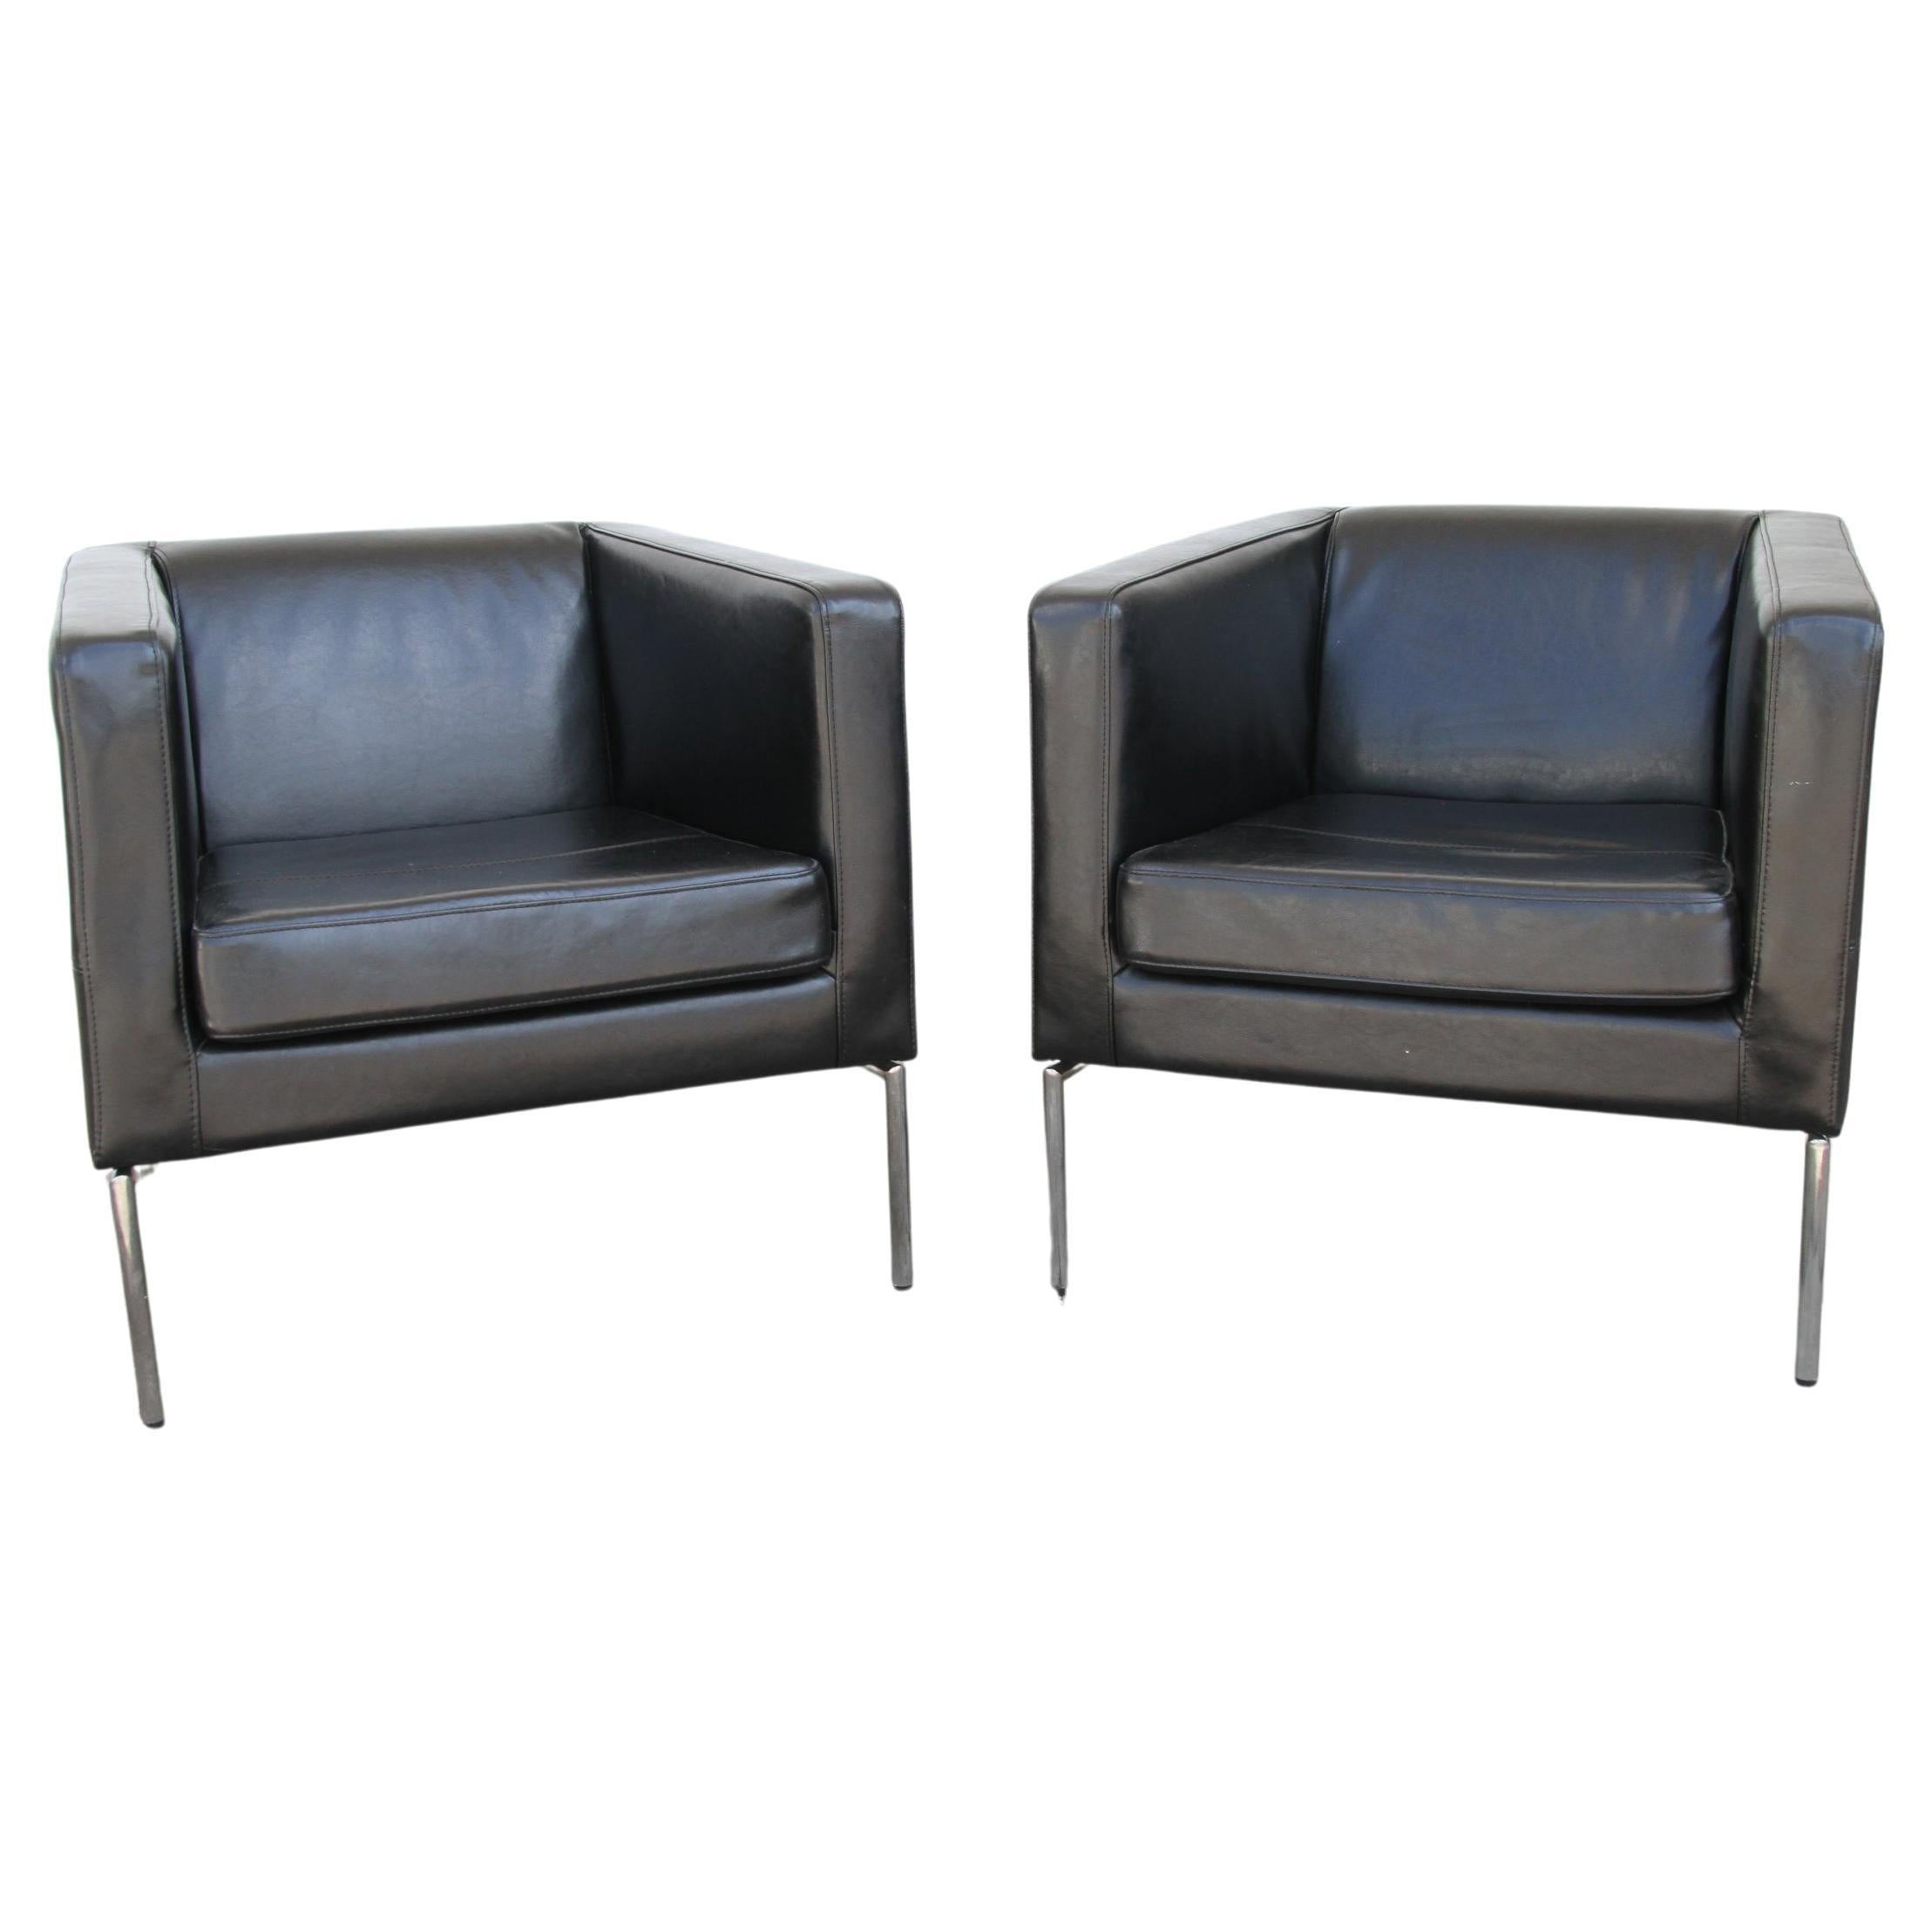 Black leather club chairs For Sale